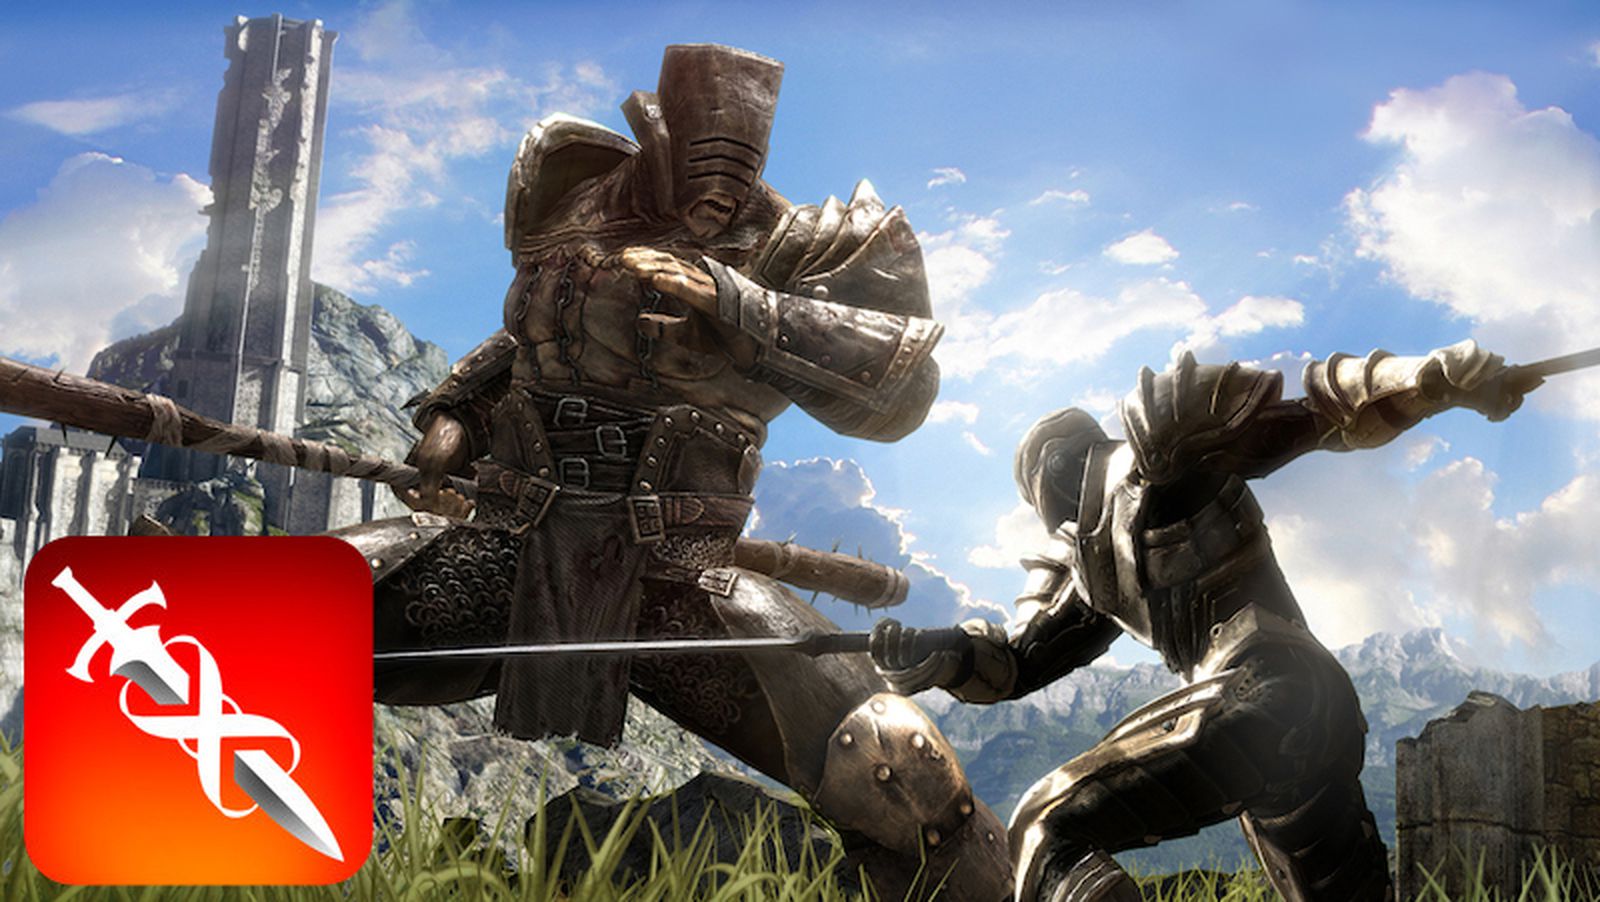 Download Epic Games' new free Infinity Blade asset packs